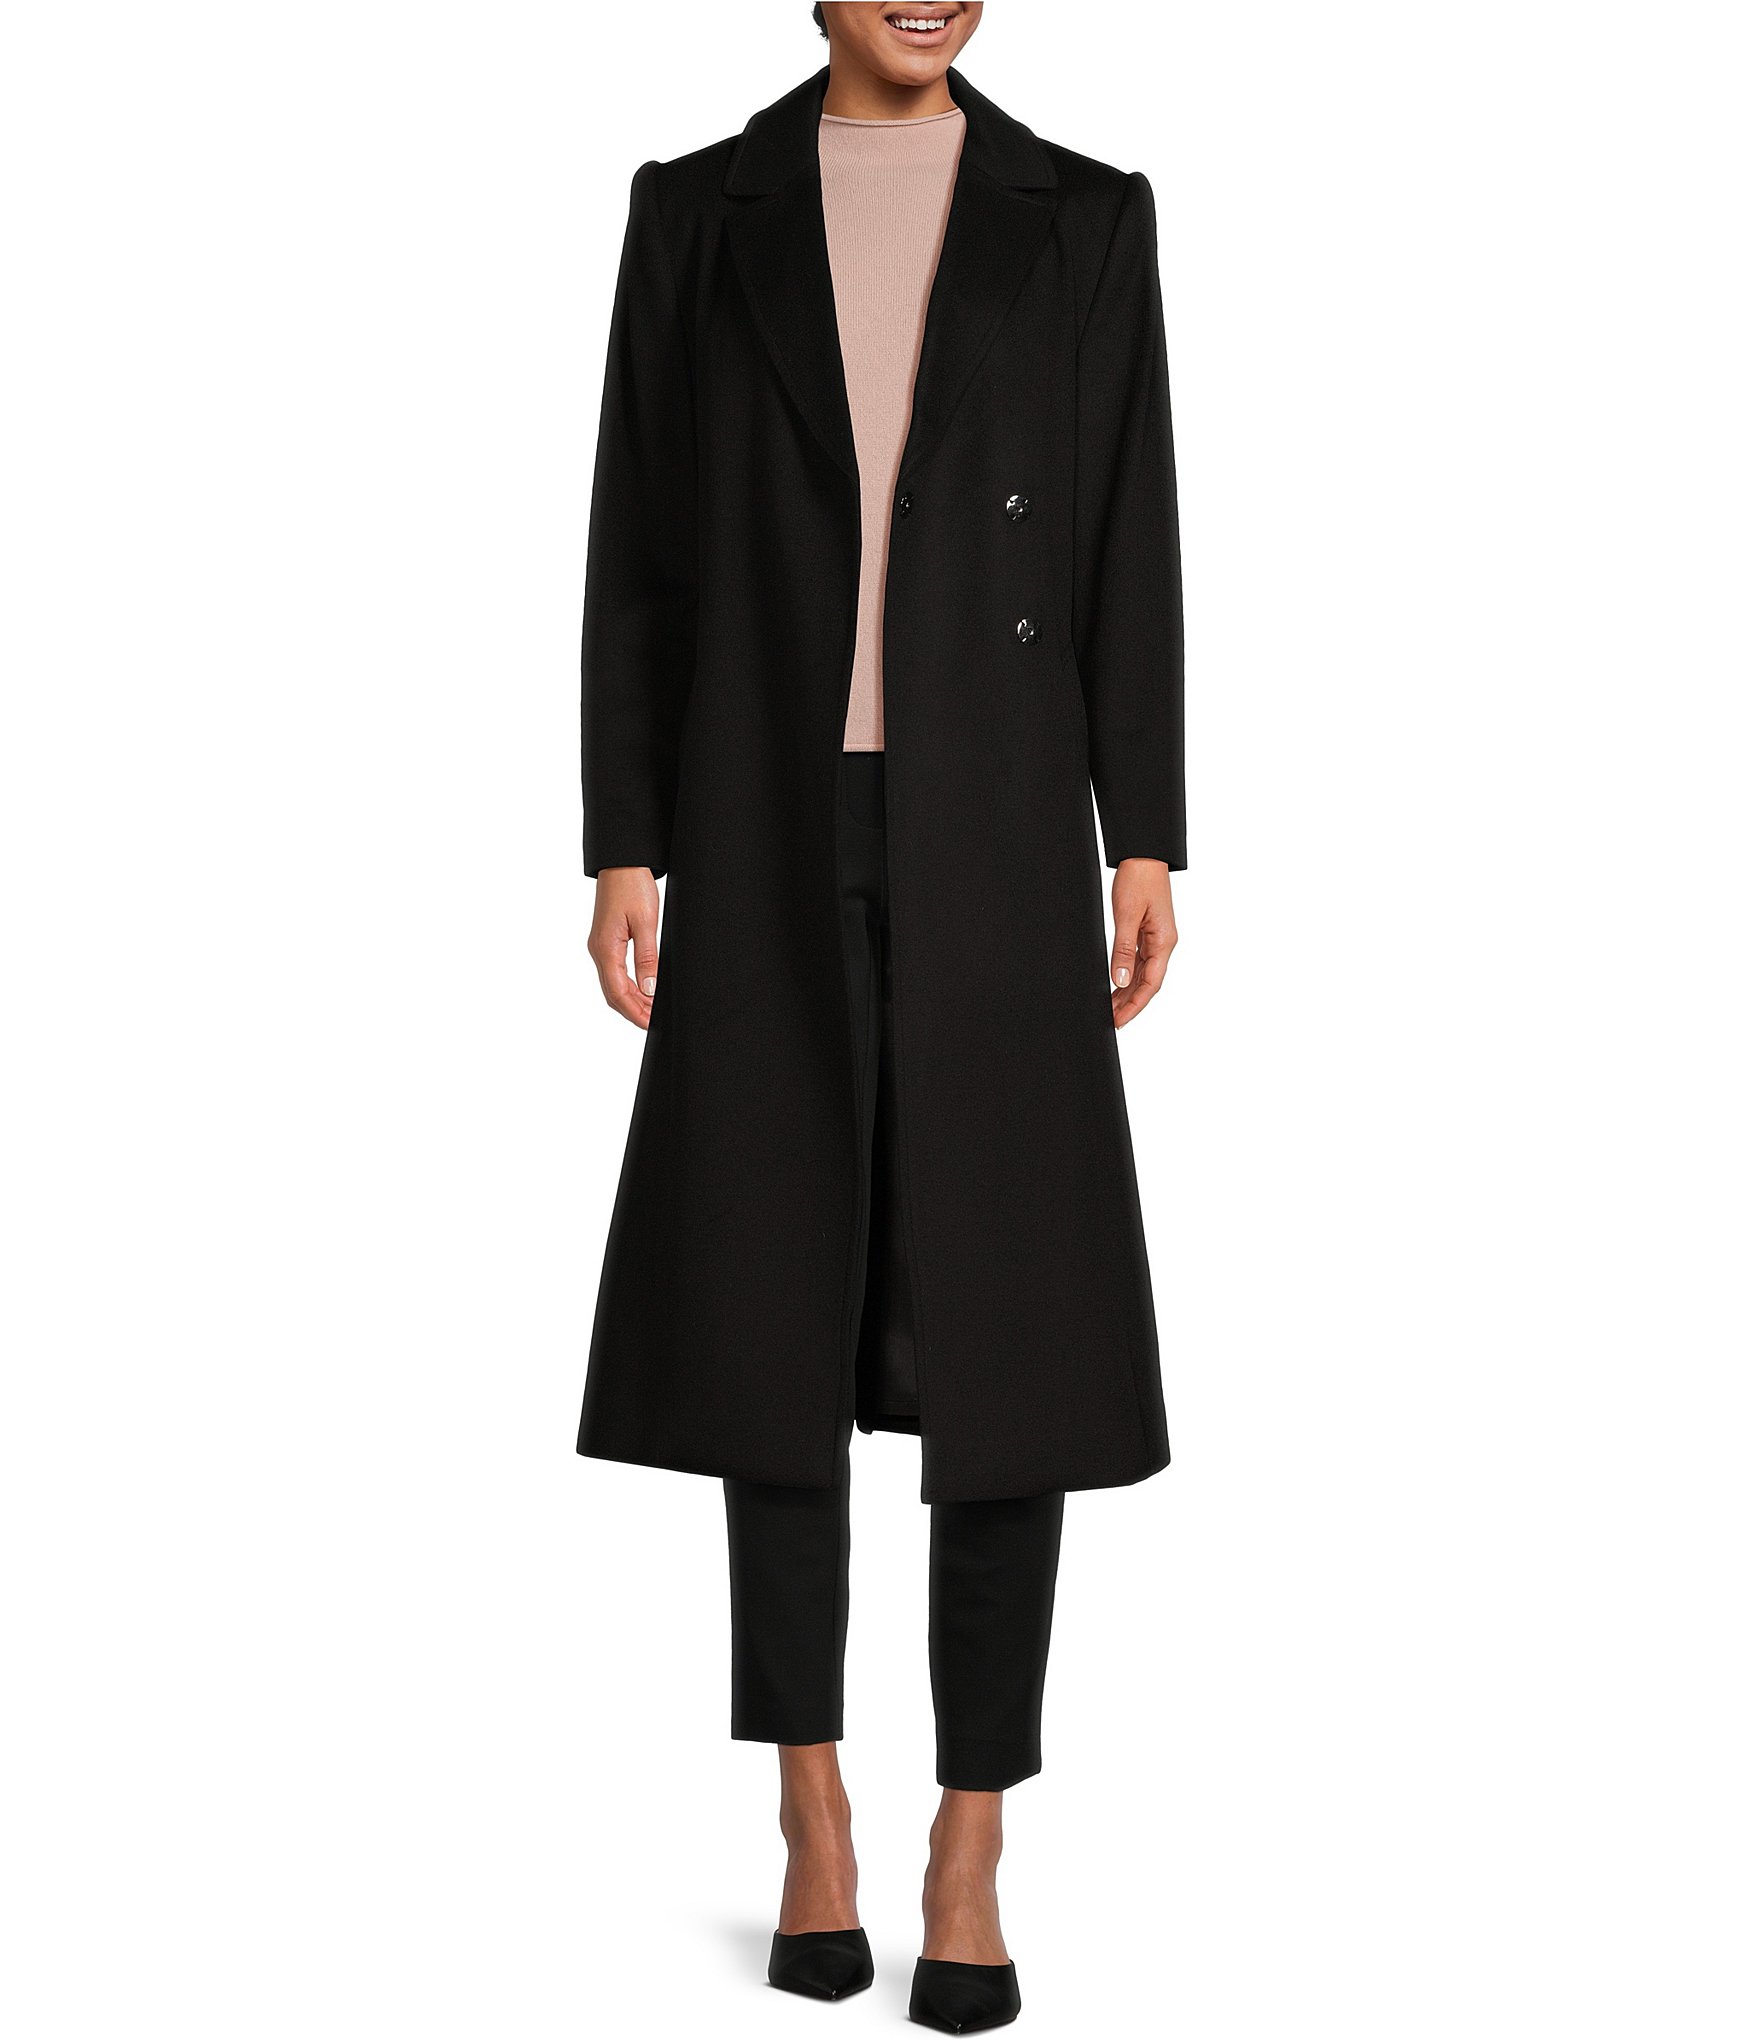 Katherine Kelly Pure Wool Notch Collar with Pleated Back Coat | Dillard's